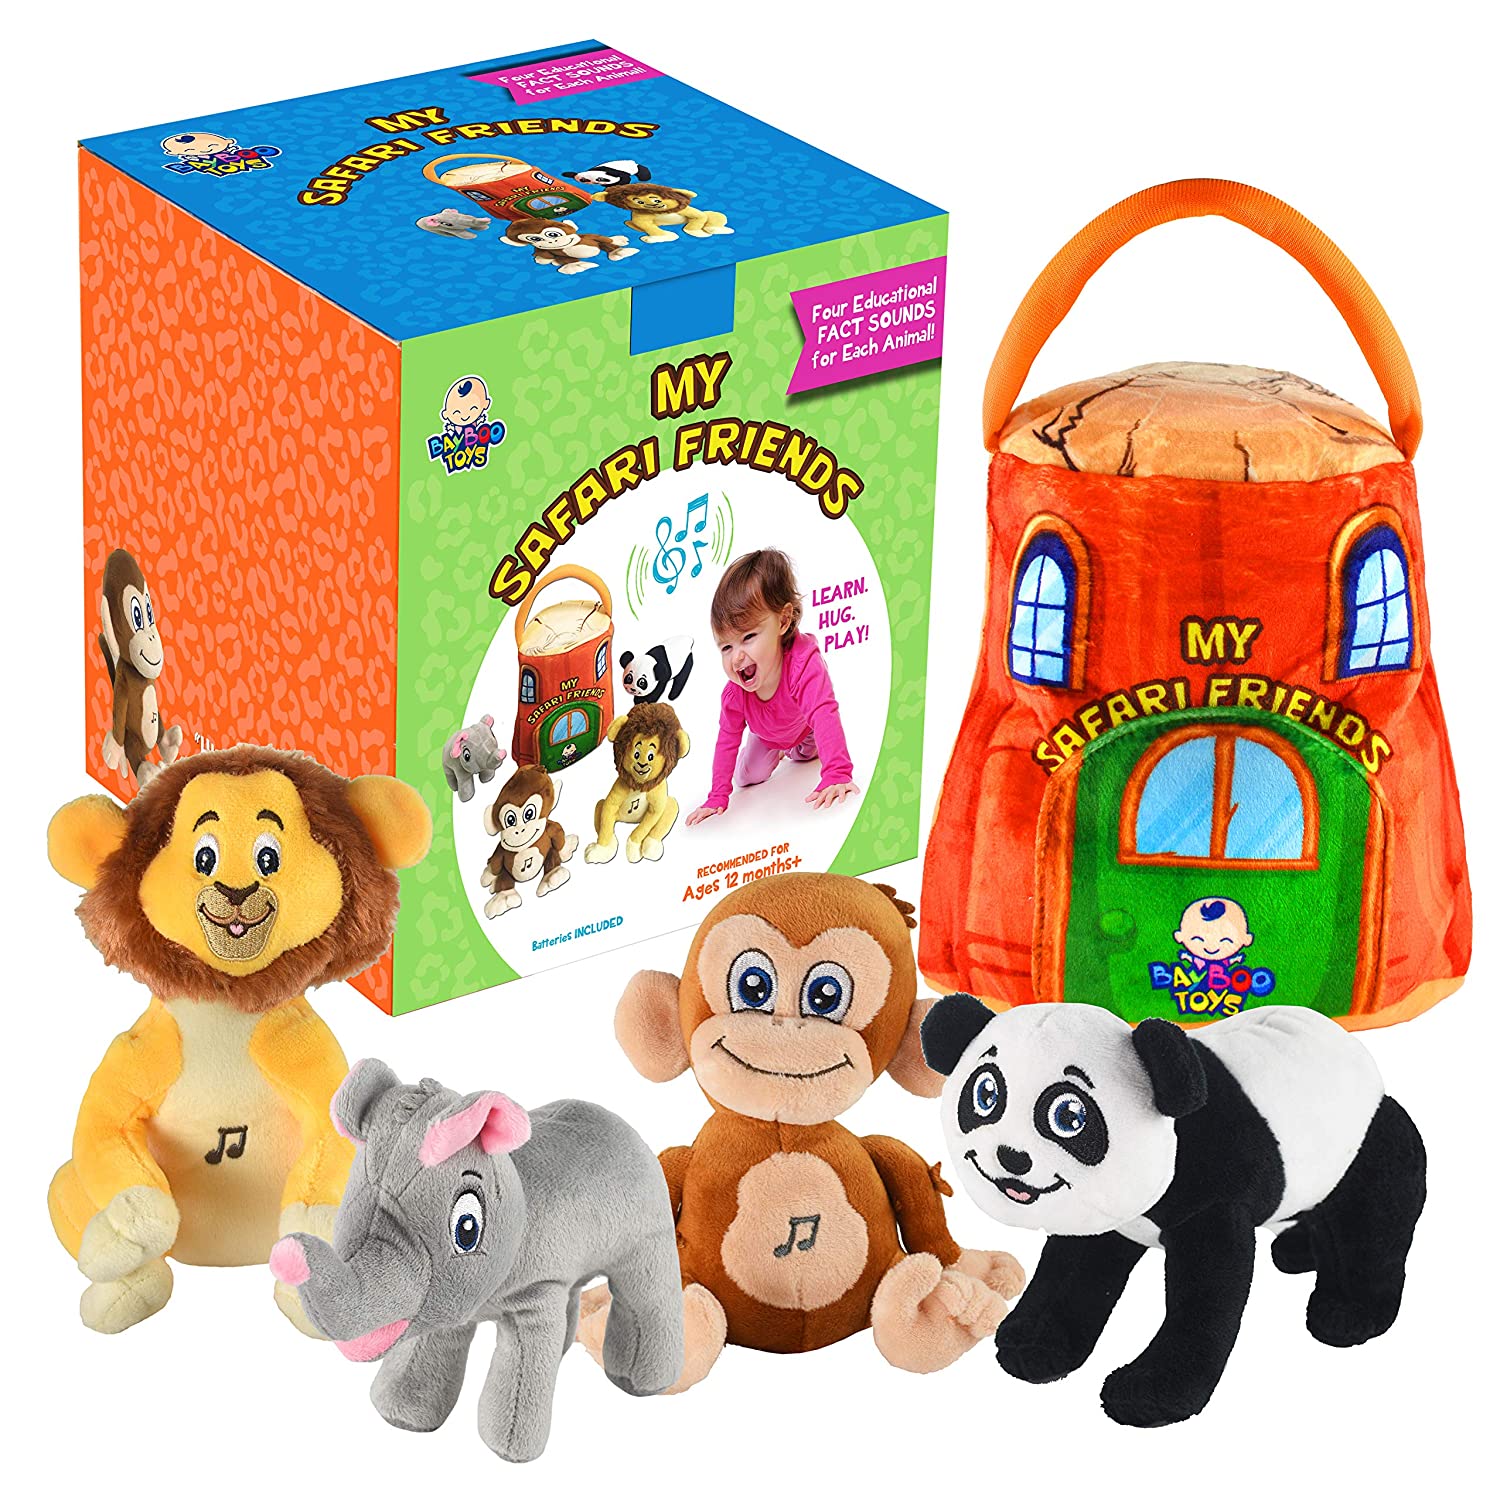 gift for 1 year old EDUCATIONAL Plush Toy Talking Animal Set, Stuffed Animals, Elephant Monkey Lion & Panda Baby Toddler Toys, FEATURING 4 ADORABLE AUDIOS for ALL 4 Toys, REAL SOUNDS and 4 FUN FACTS!